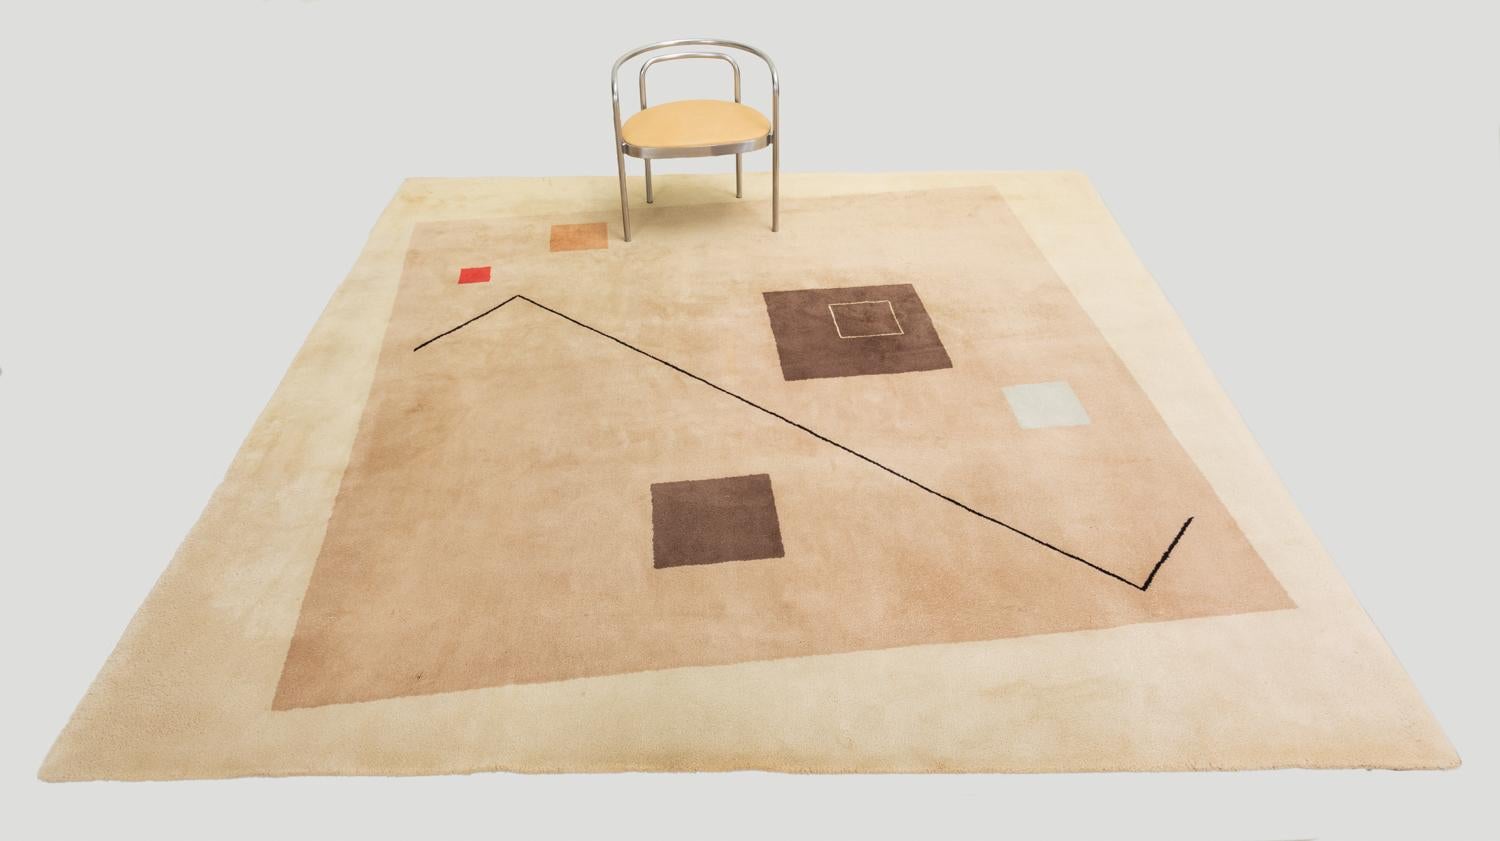 A large square carpet produced in France for Italian textile company Tisca. This collection of hand-tufted rugs featured Eileen Gray-esque configurations of elegantly disjointed geometry in 100% wool fiber. The Minimalist design has a large taupe